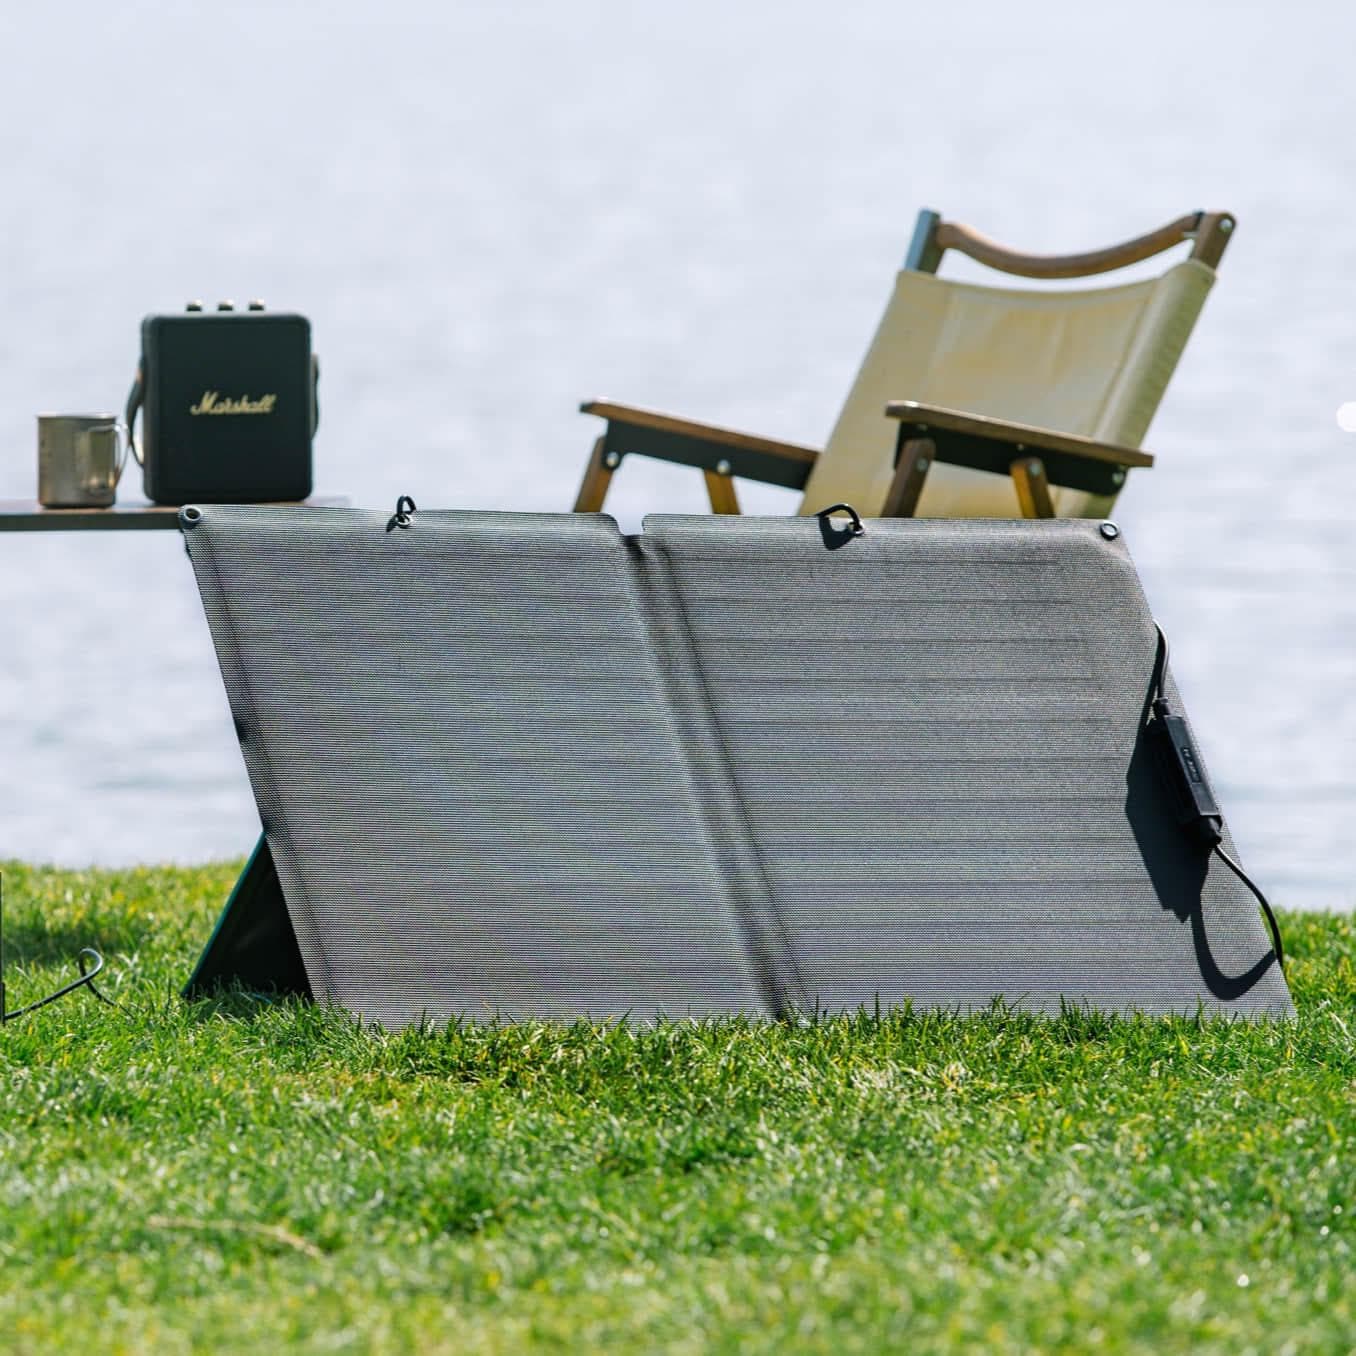 A portable solar panel sitting on the grass next to a lawn chair, available for shipping in 1-2 weeks.